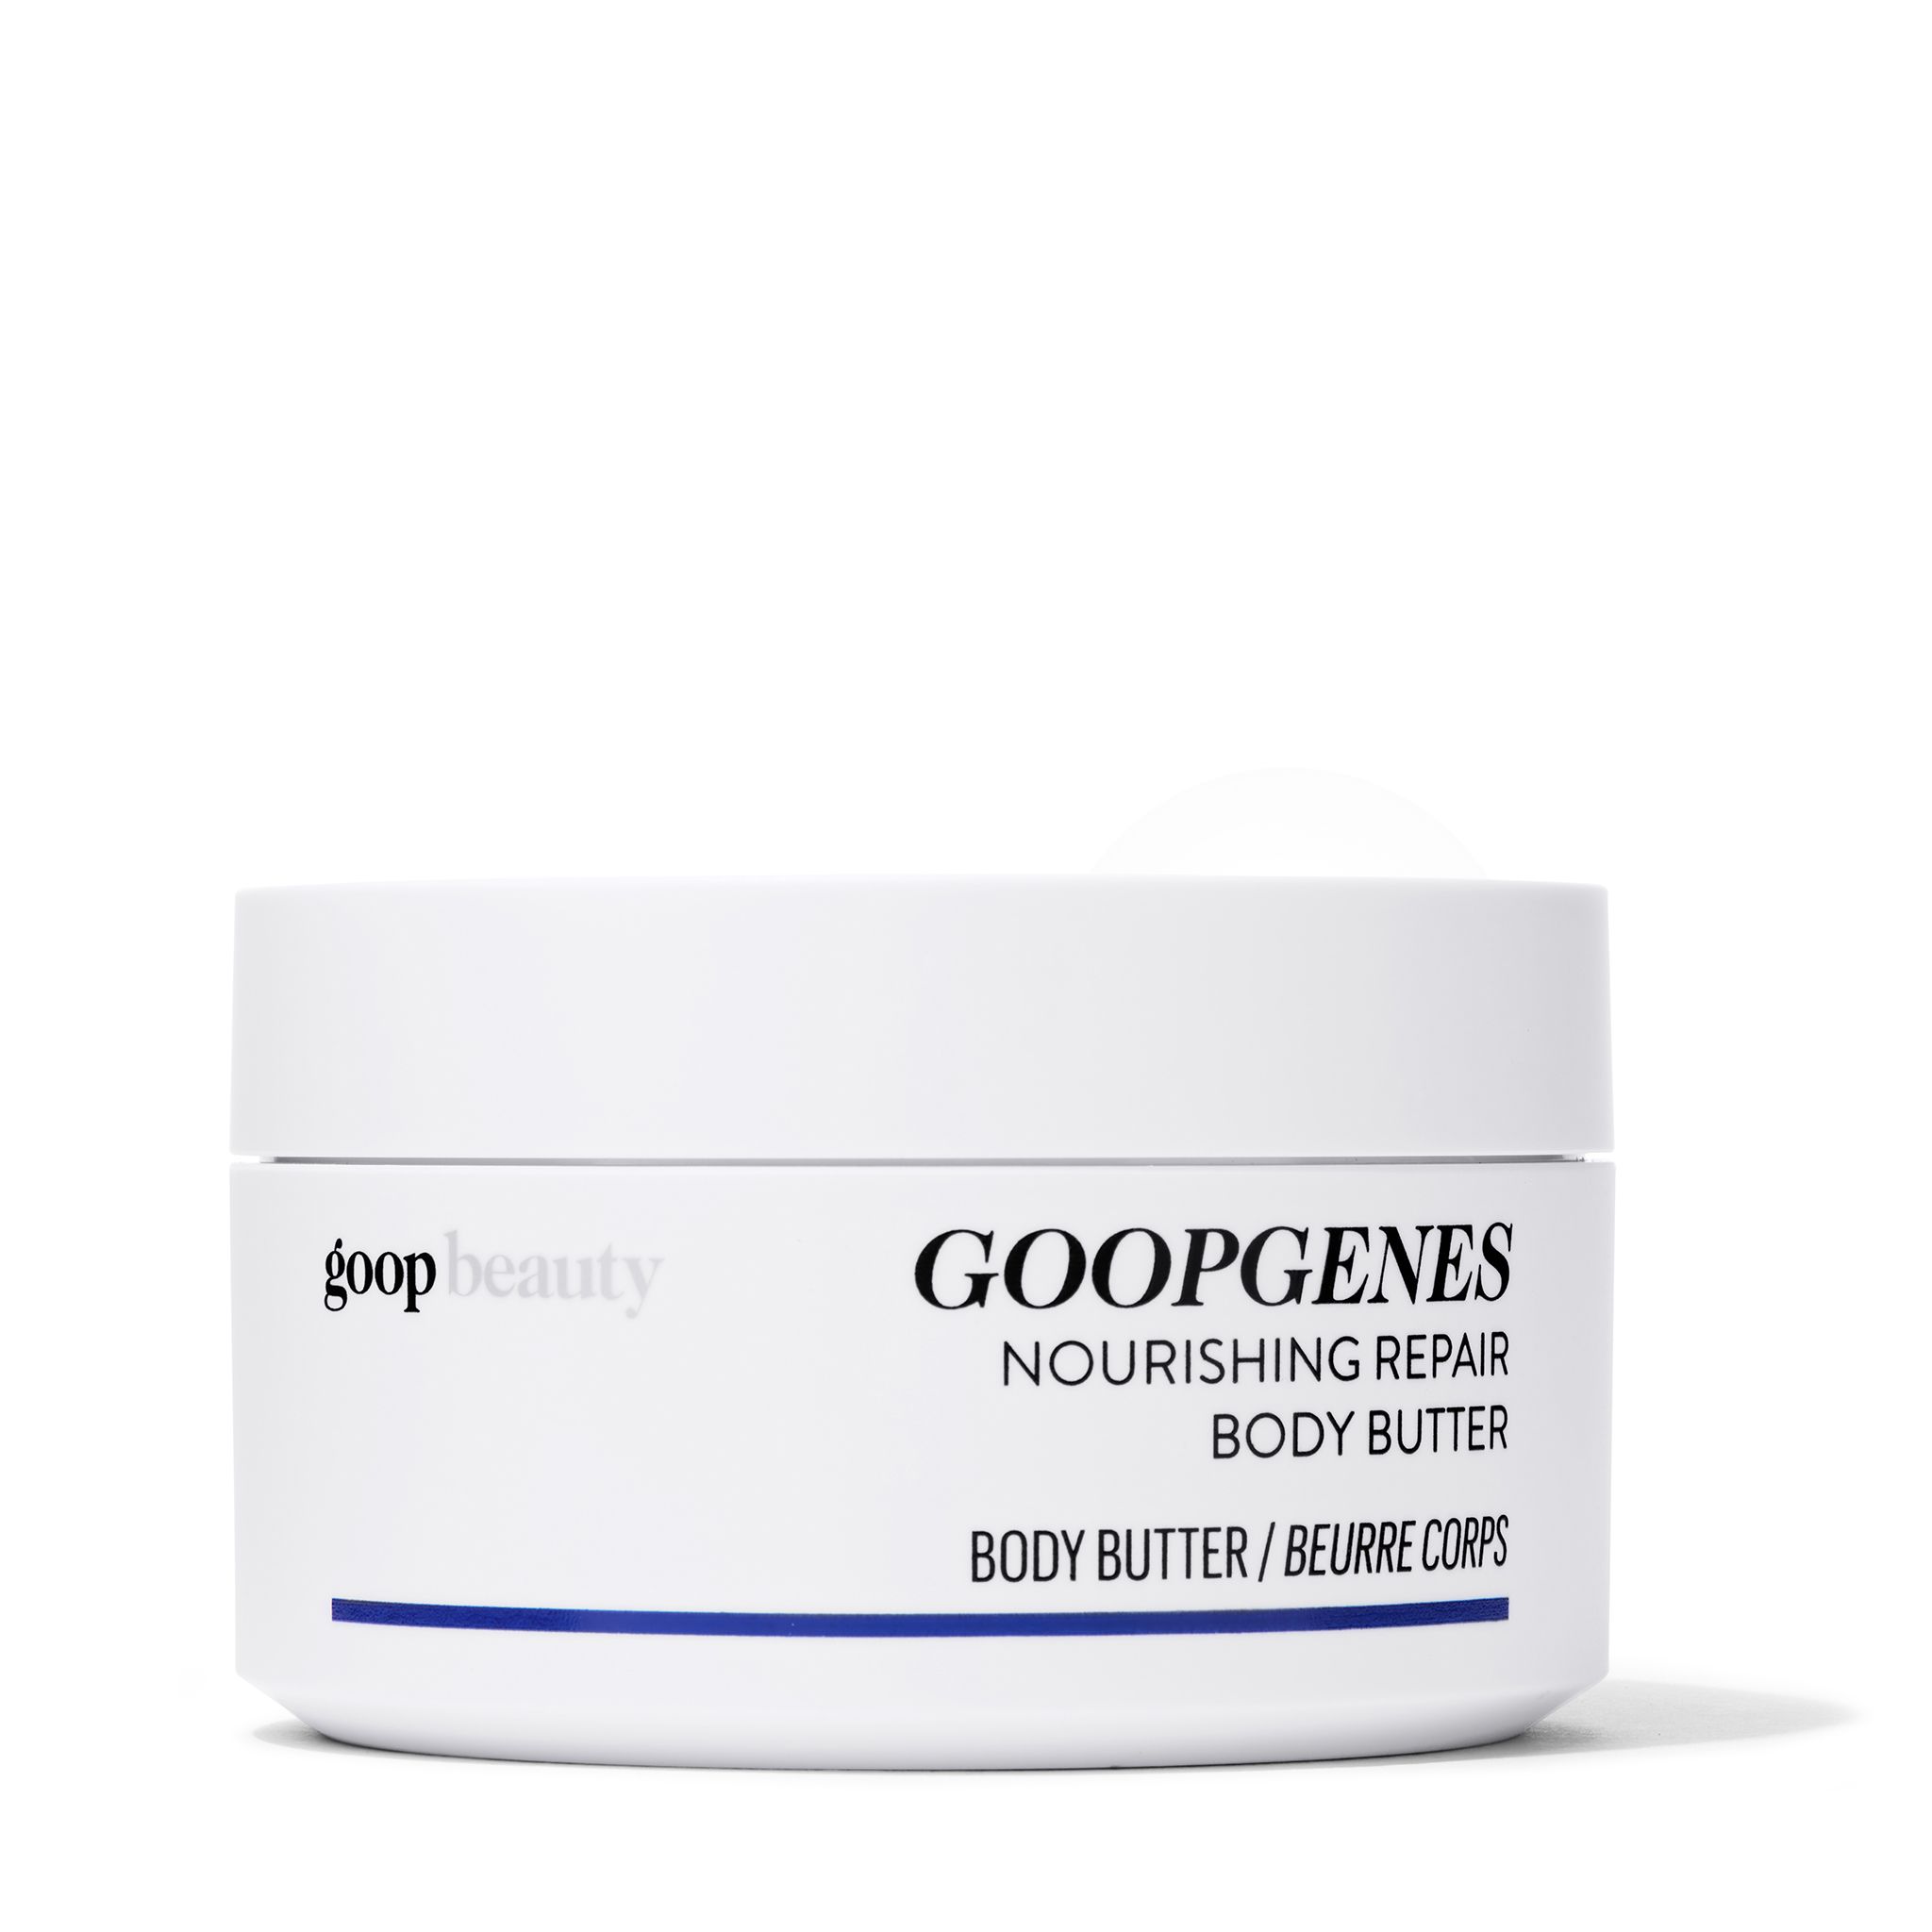 How GOOPGENES Body Butter Helps With Dry Winter Skin